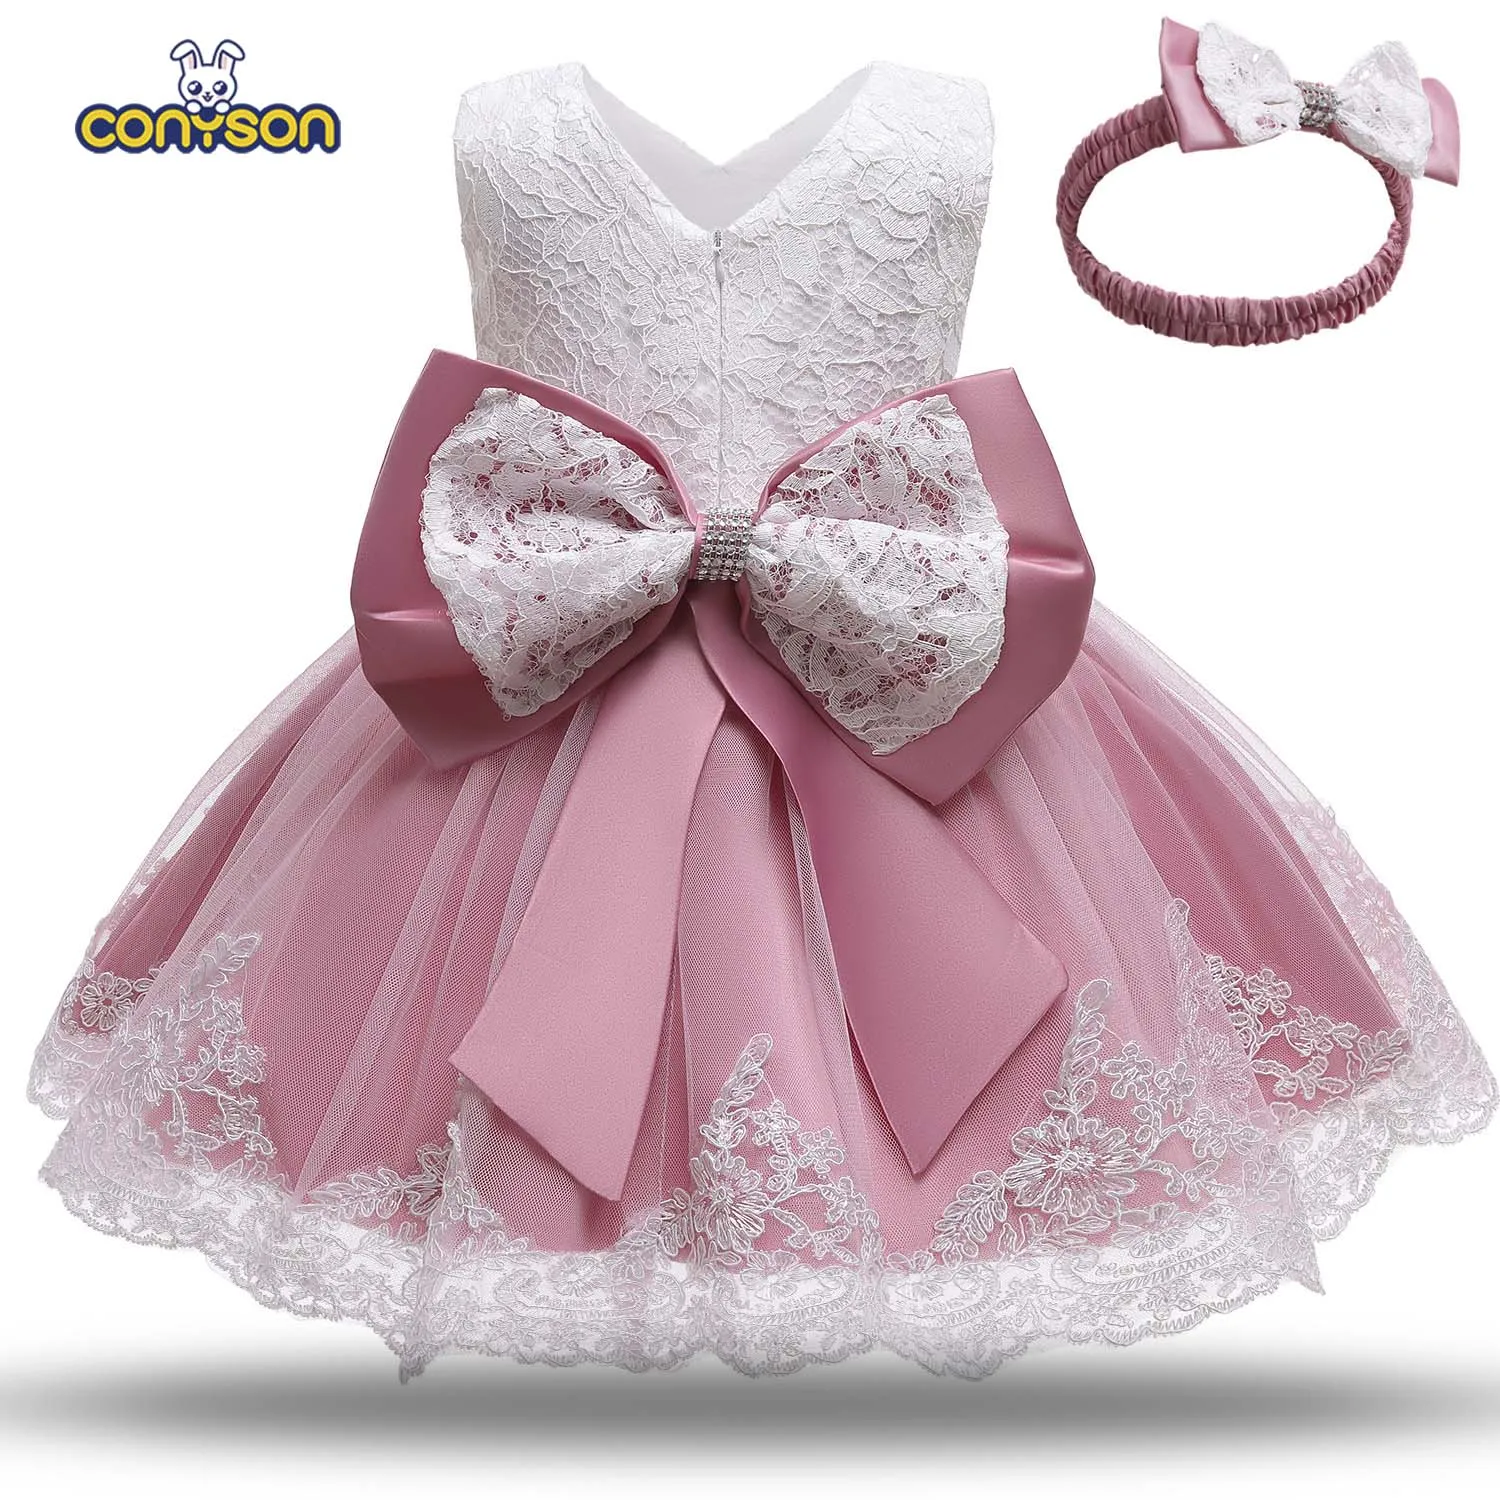 

Cute Kids Lace Dress Flower Girl Dresses For 1 Years Old Baby Girl Party Baptism Dress With Hair Band, Picture shows